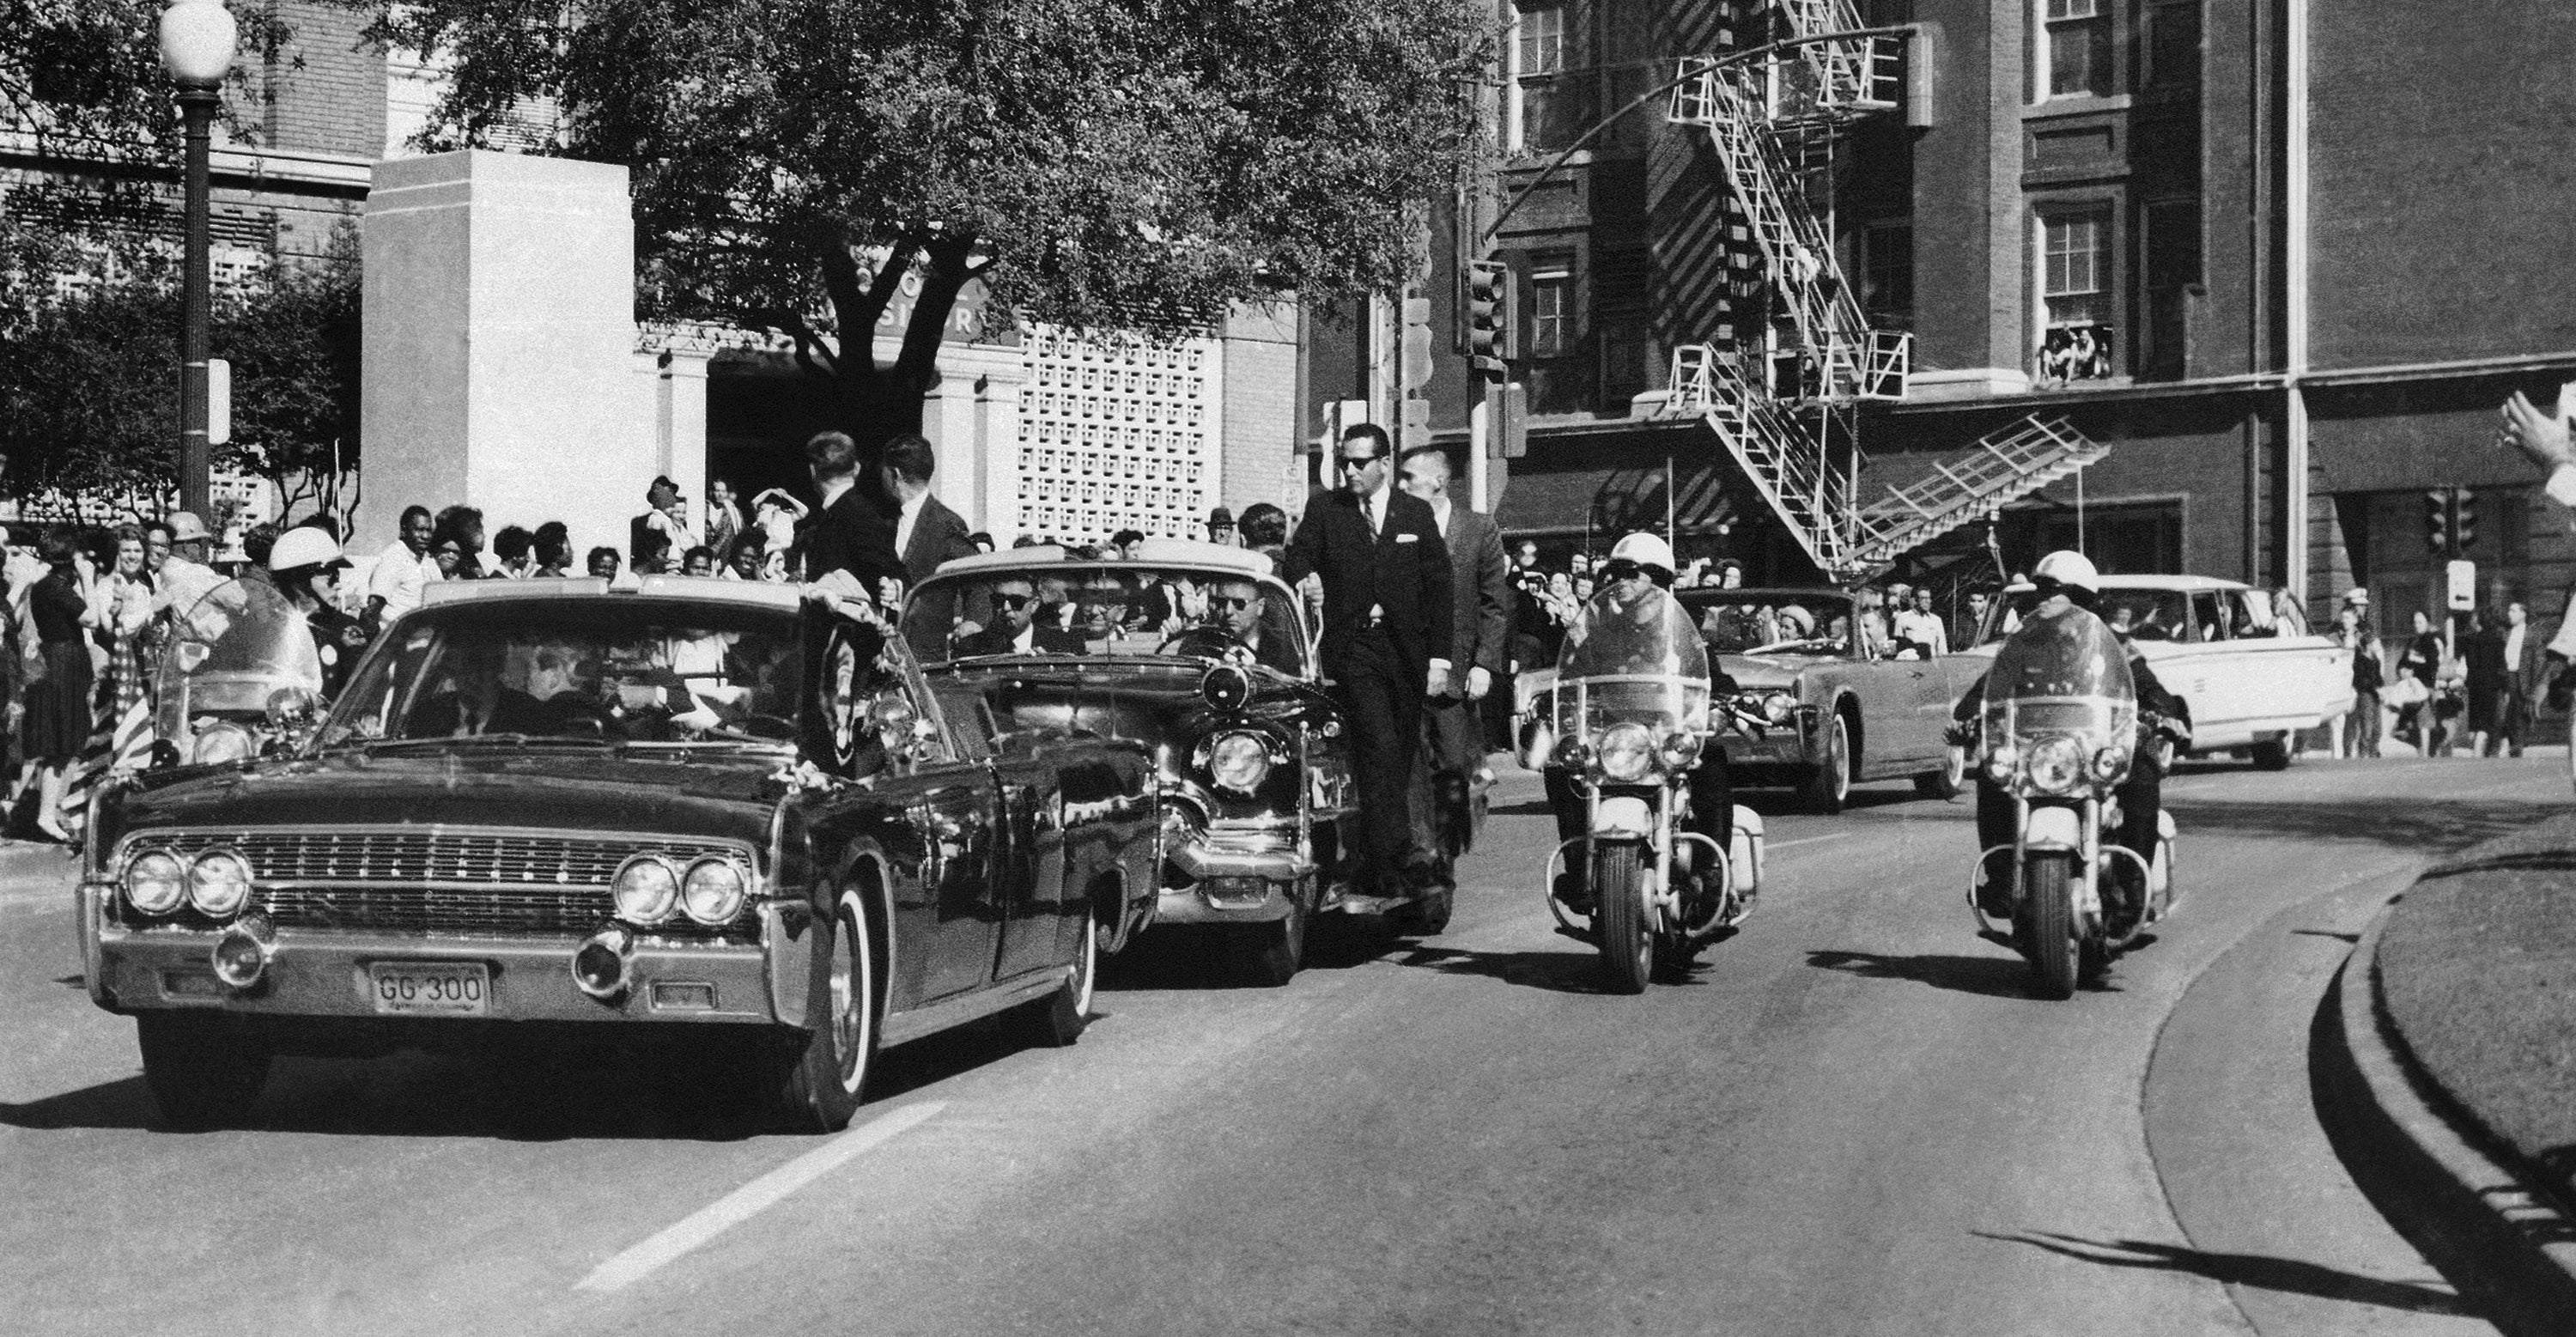 President John F Kennedy’s motorcade pictured in 1963, just moments before his assassination. Wecht found fame arguing Kennedy was assassinated by more than one person